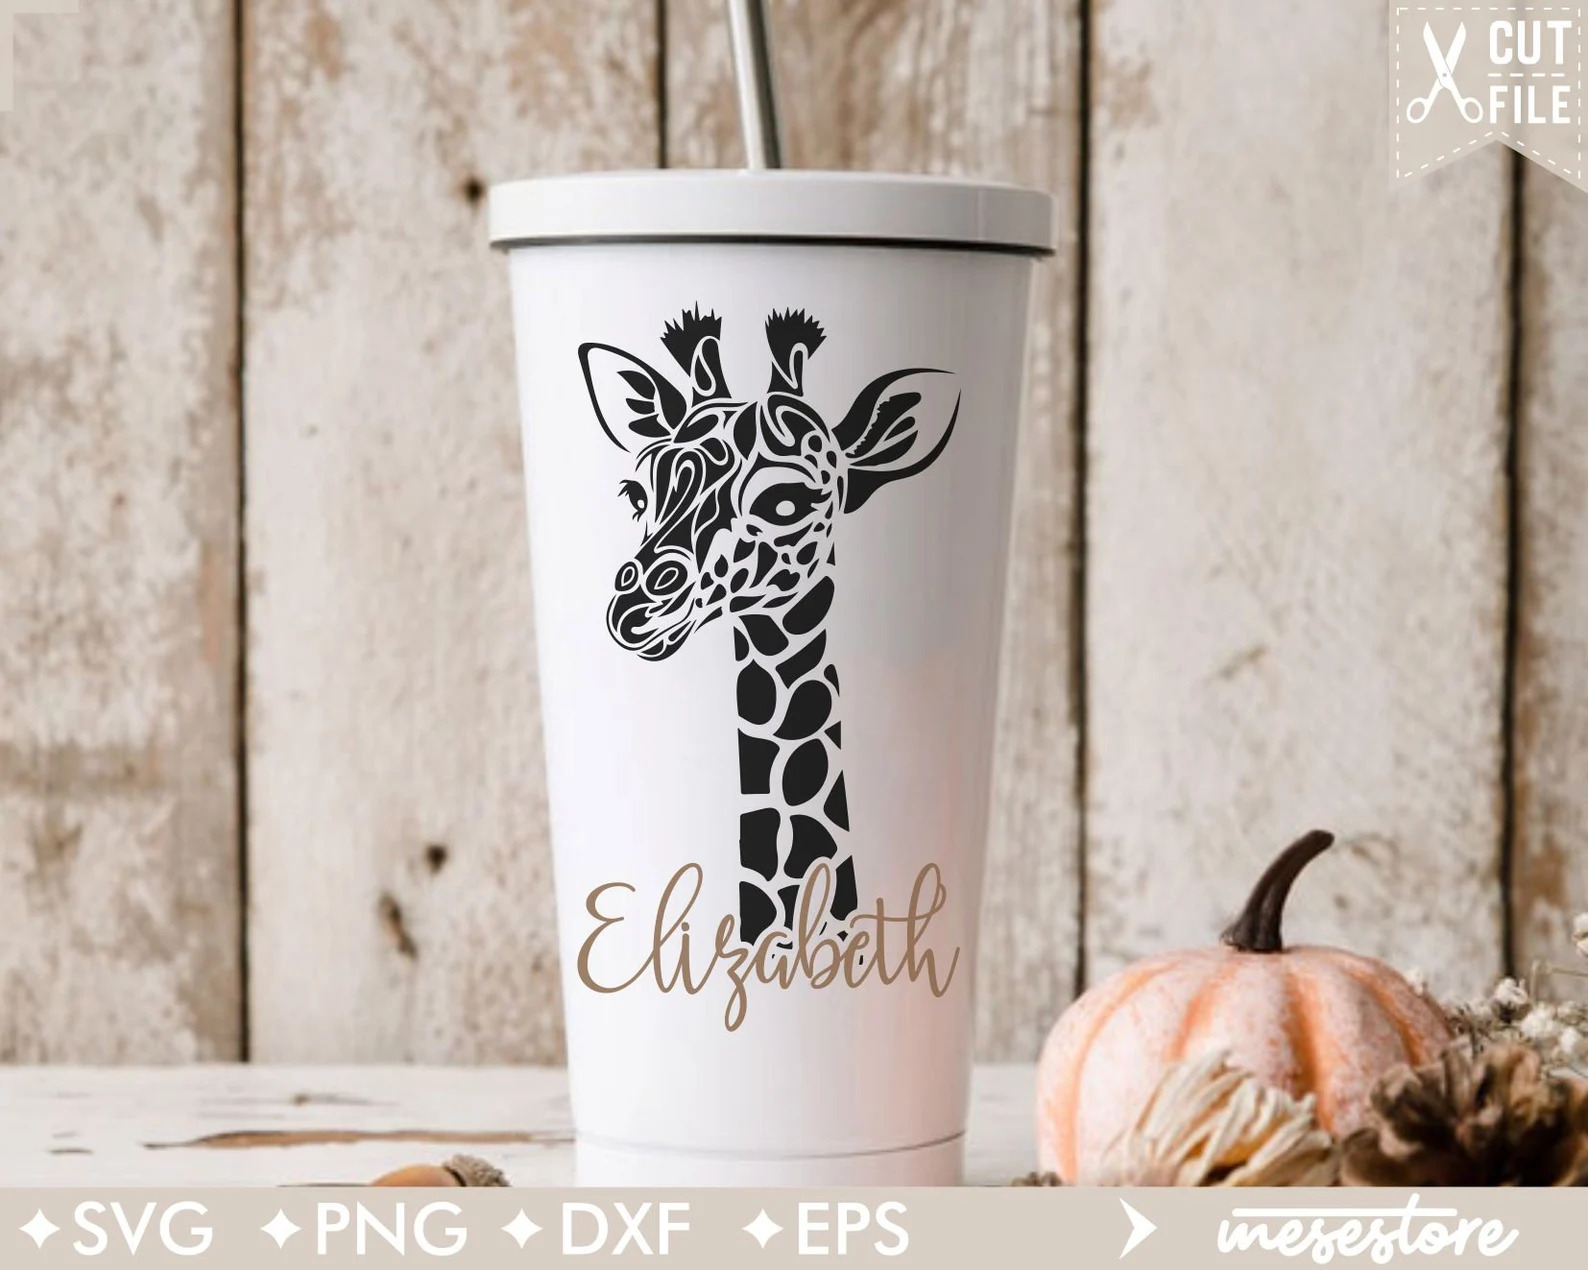 White cup with a giraffe on it next to a pumpkin.